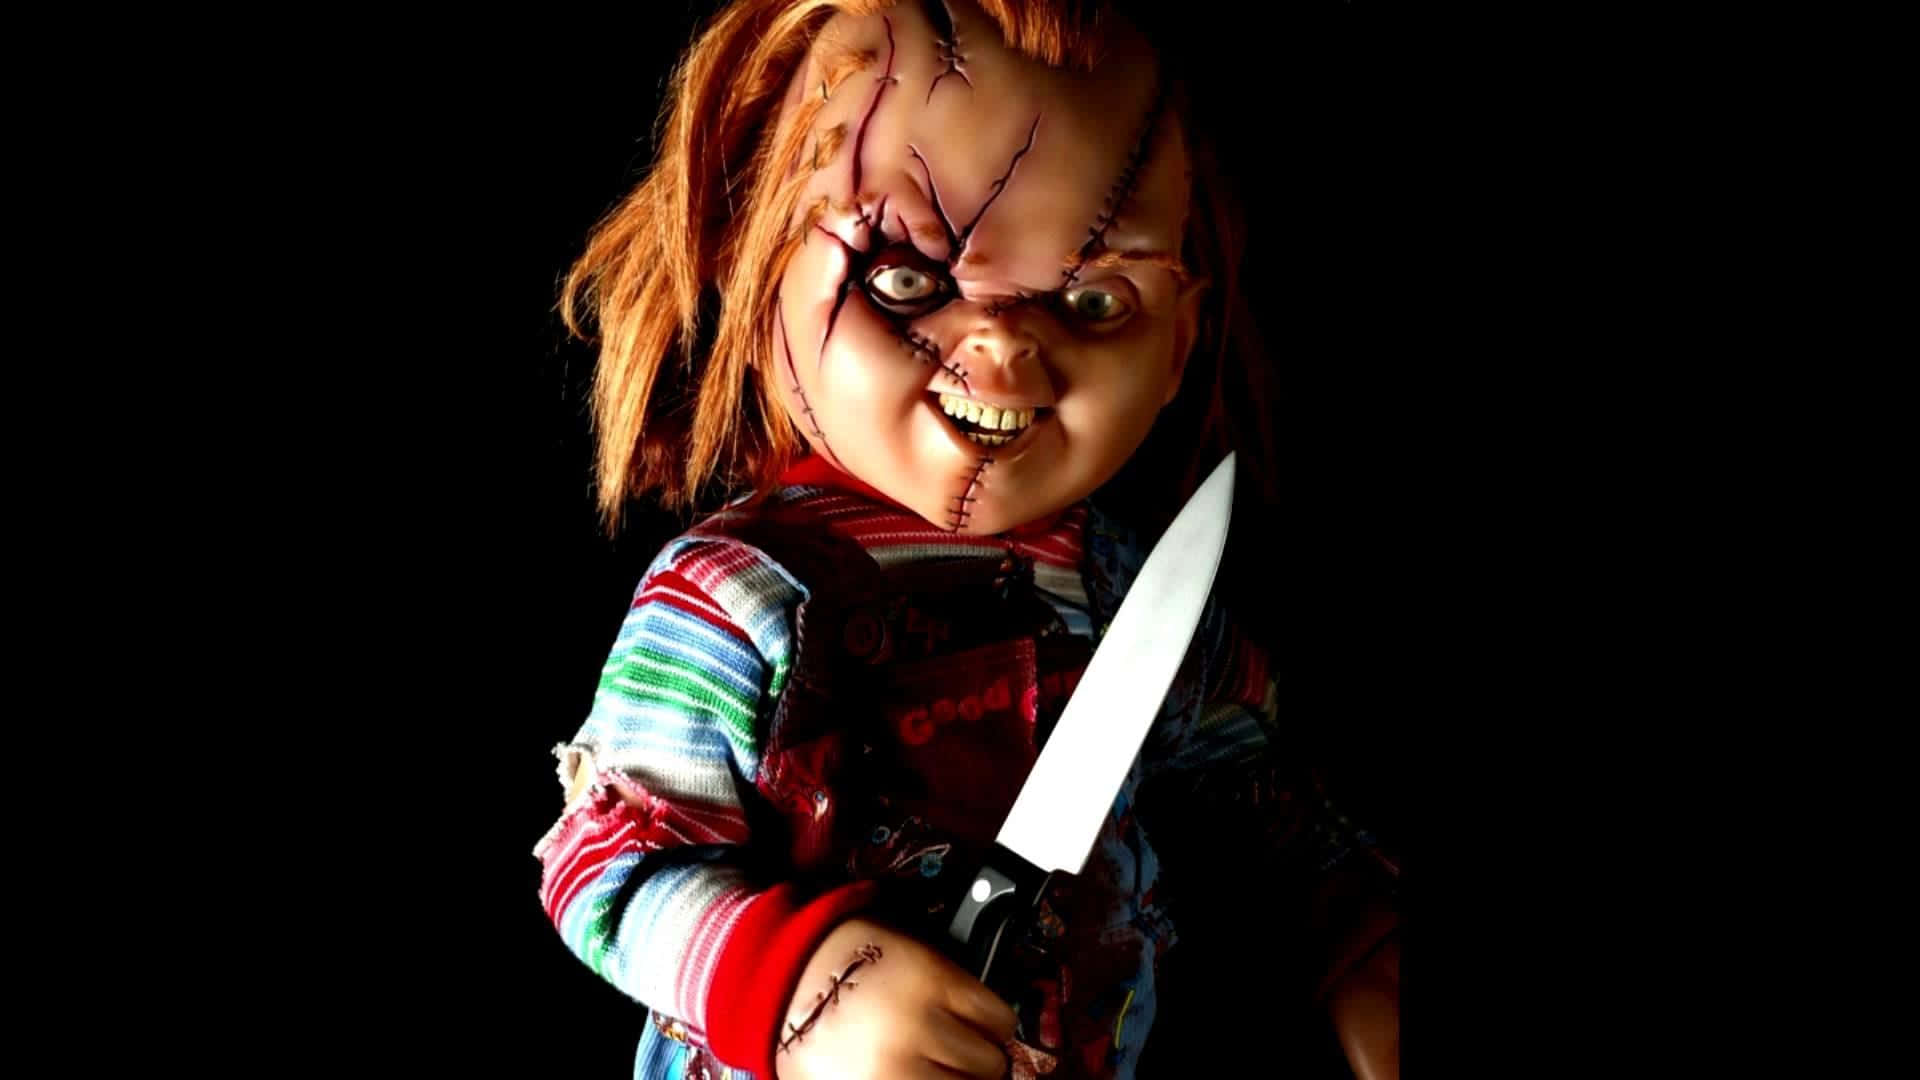 A terrifying scene with a Chucky Doll looking straight at the camera. Wallpaper